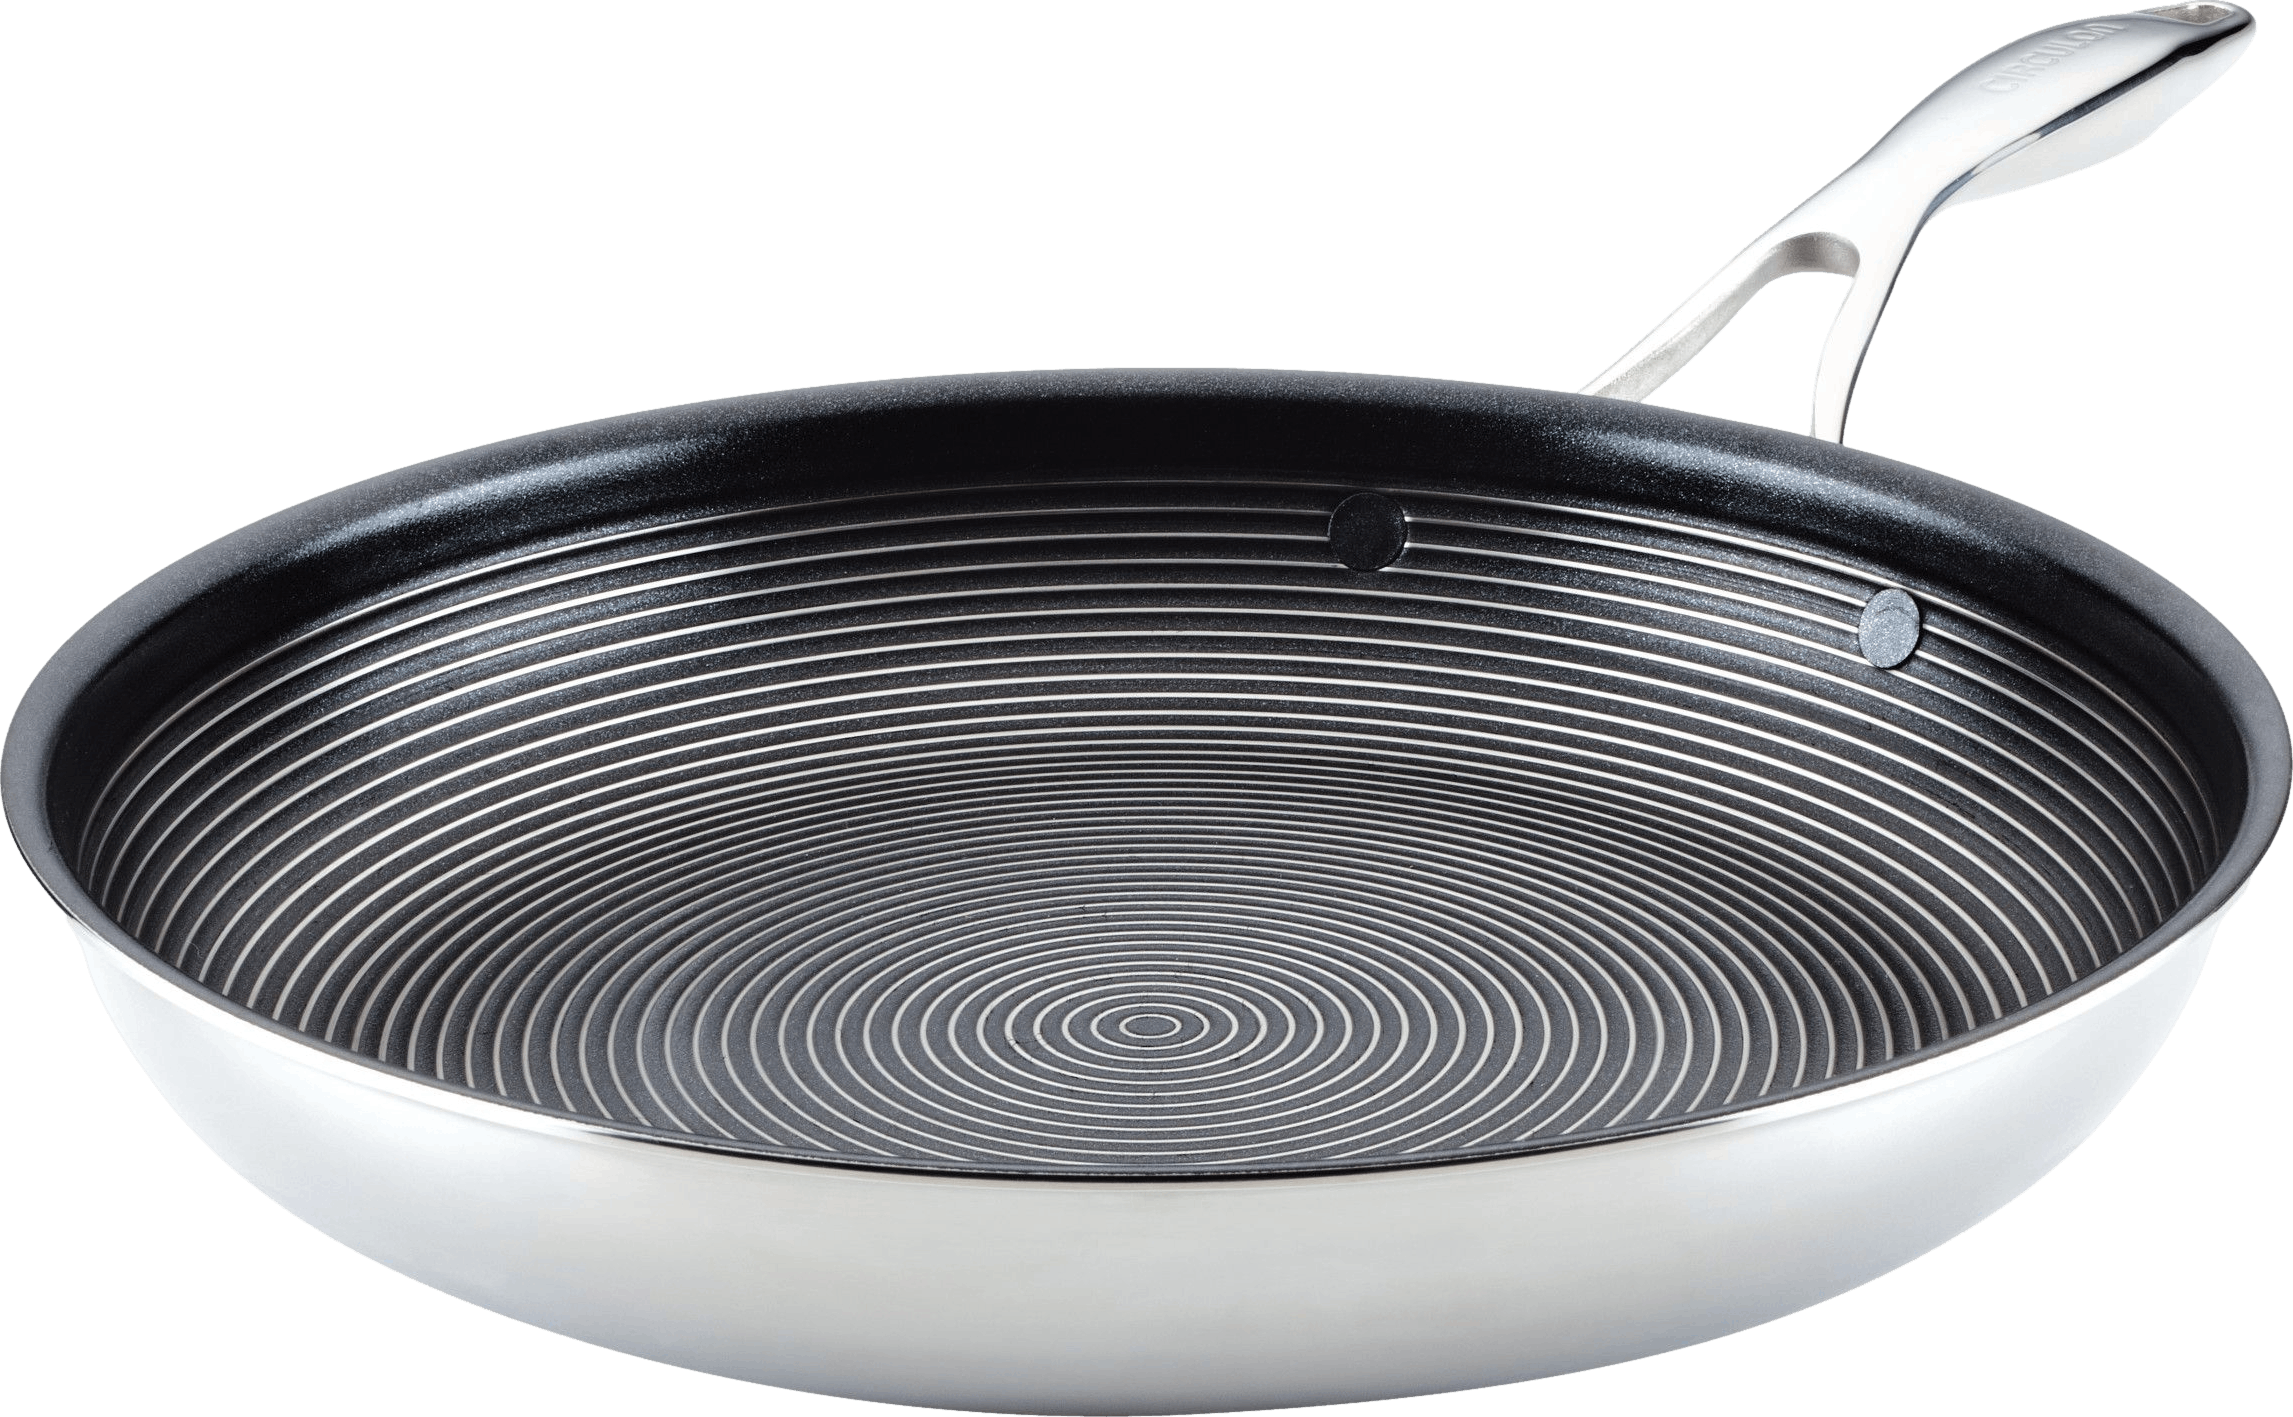 12 Inch Hybrid Stainless Steel Griddle Non Stick Fry Pan with Stay